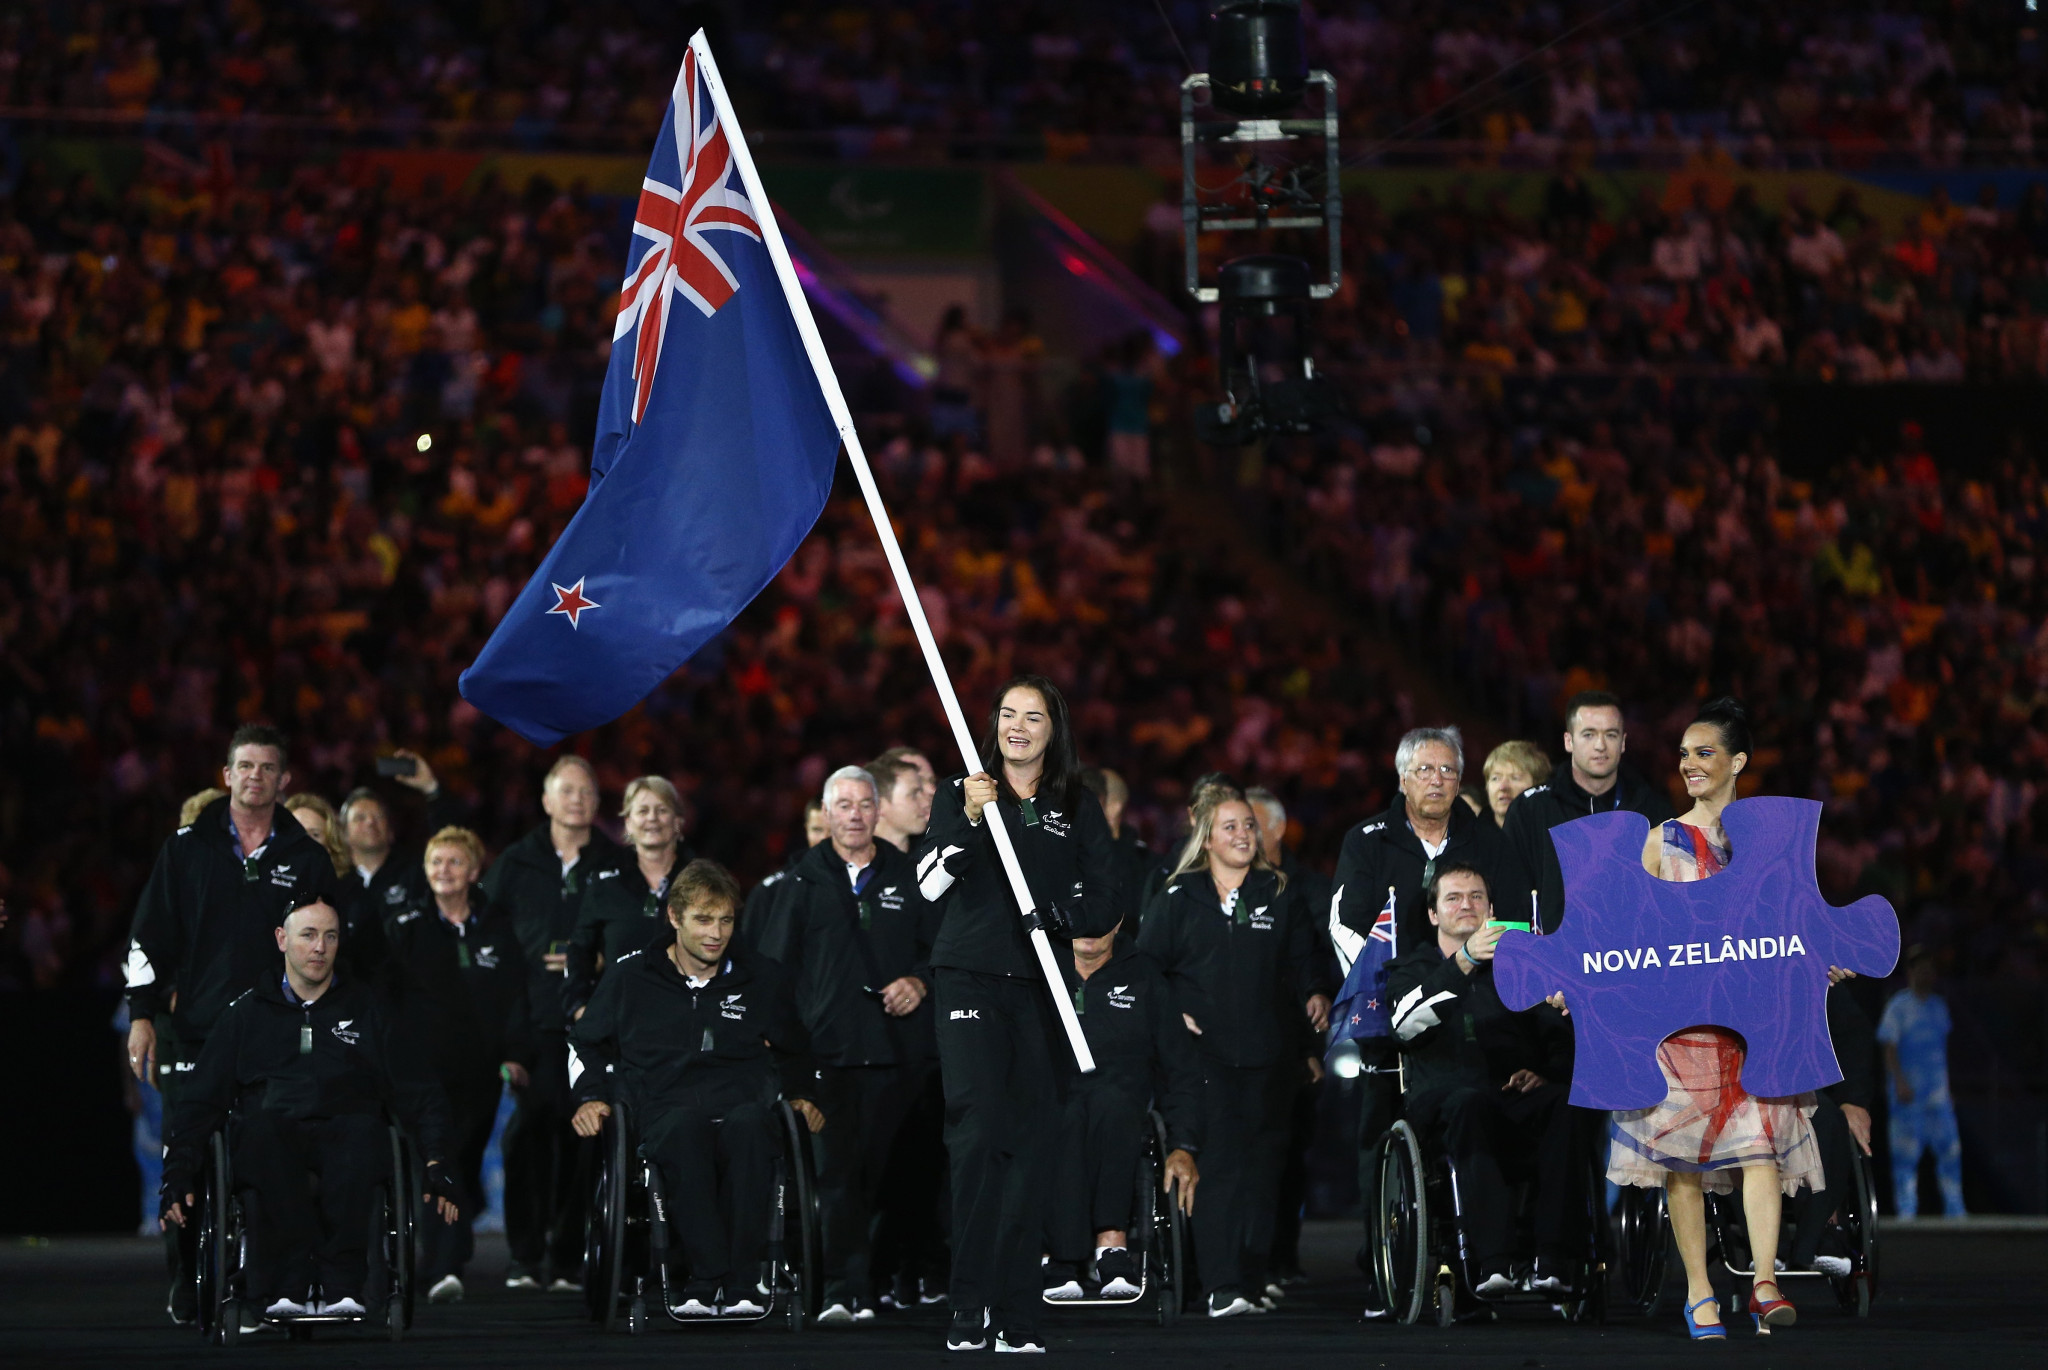 New Zealand have won 221 medals across 23 Paralympic Games ©Getty Images